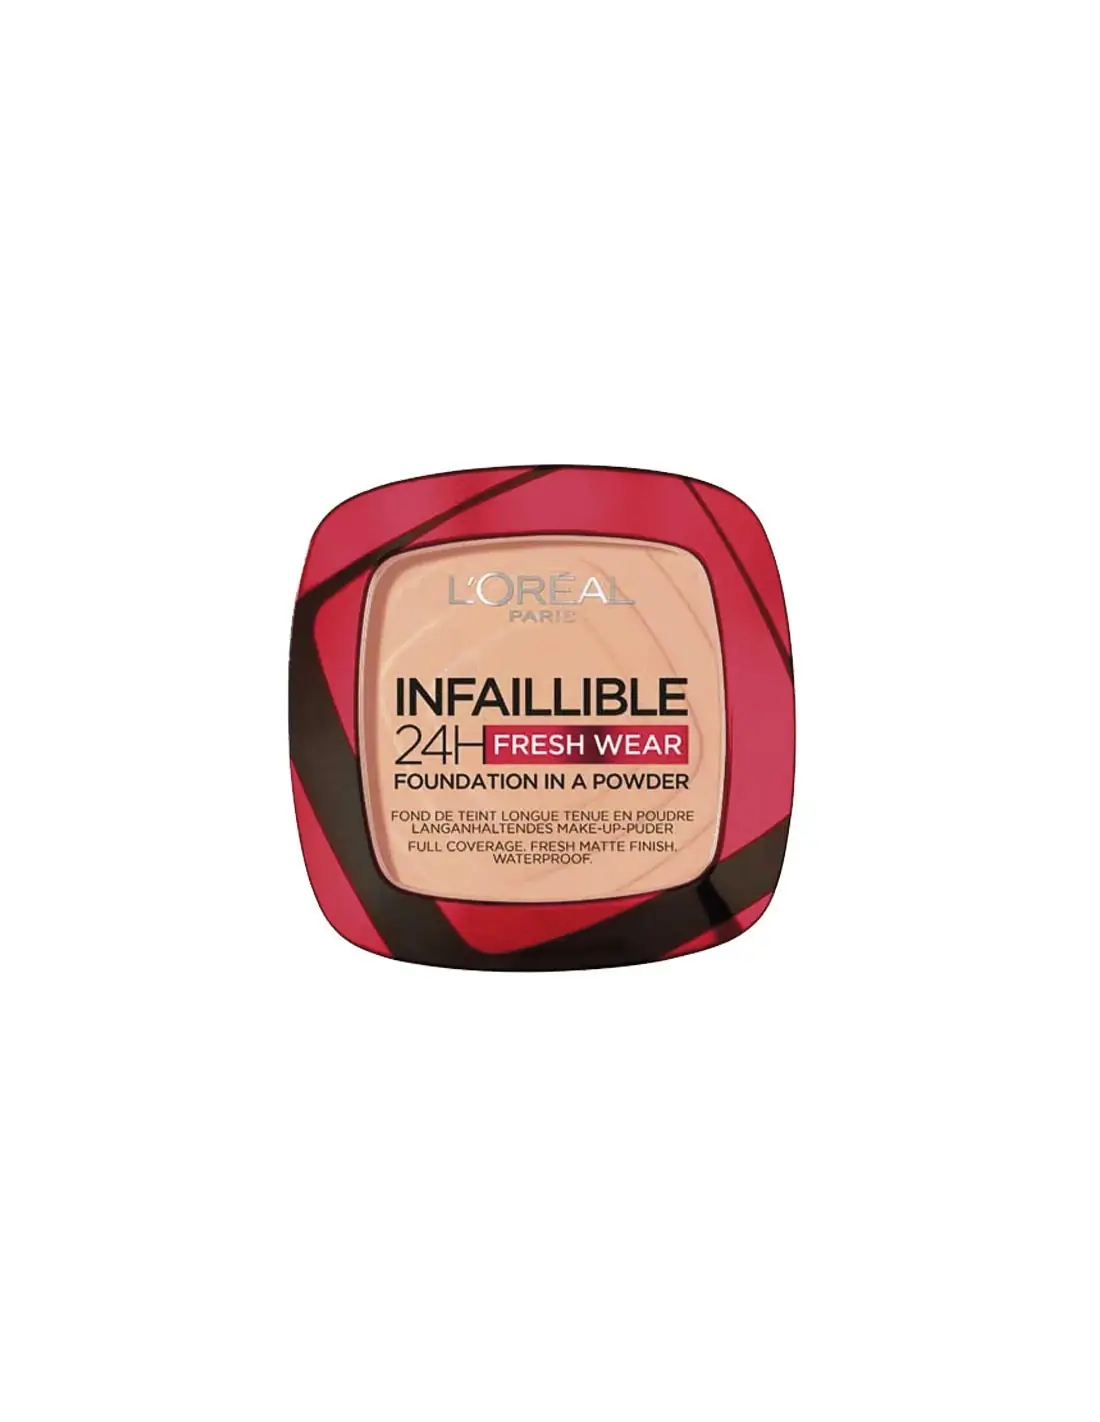 Maquillaje Infalible Fluido Normal 24h